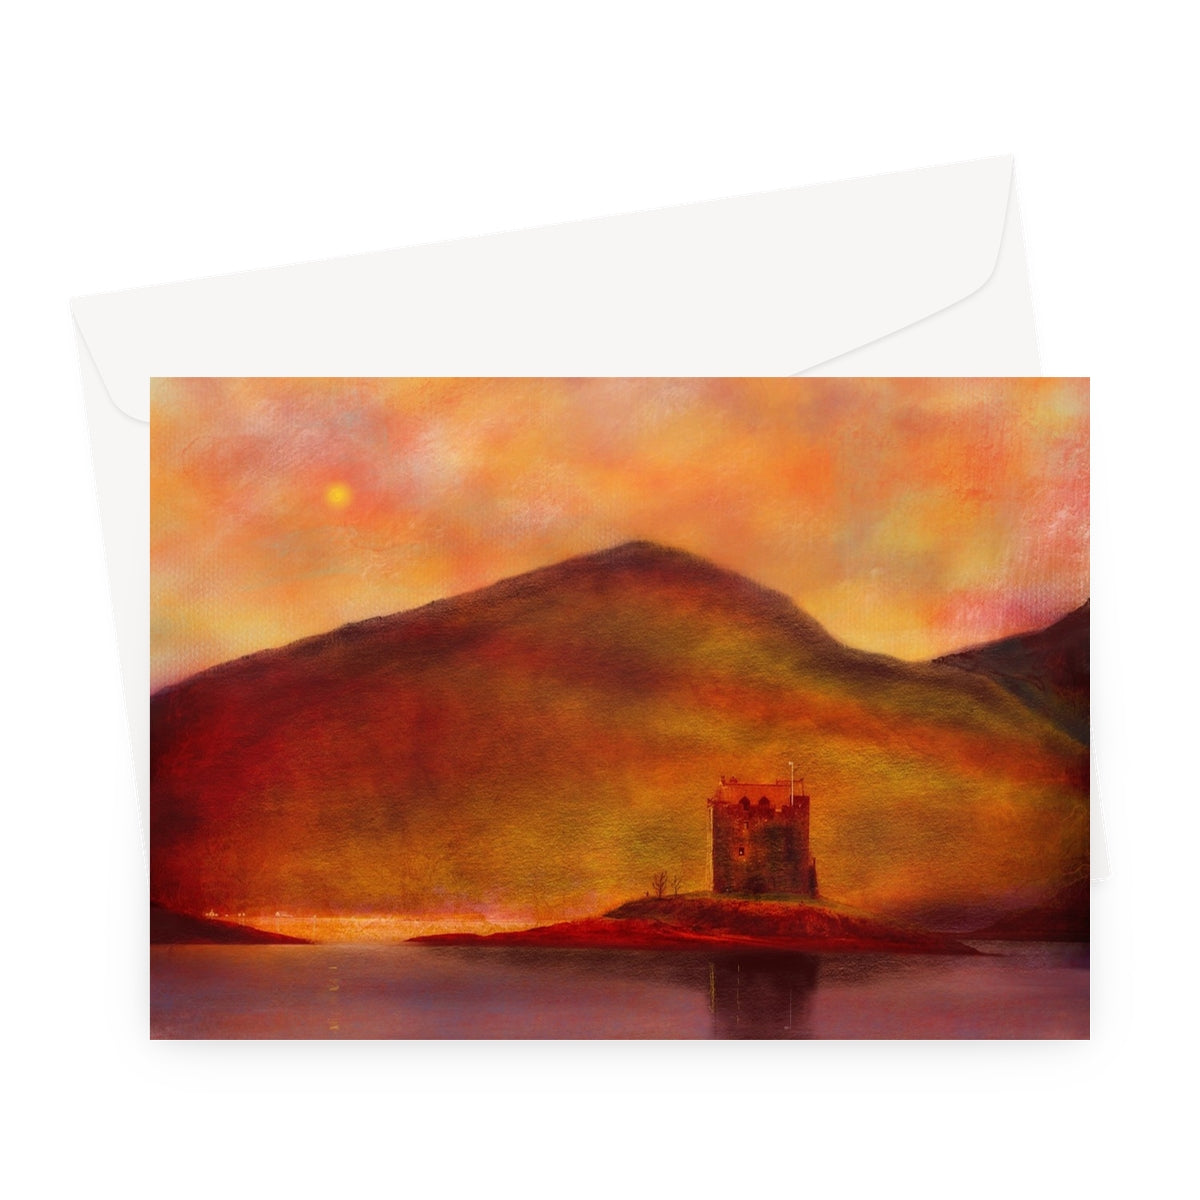 Castle Stalker Sunset Art Gifts Greeting Card-Greetings Cards-Historic & Iconic Scotland Art Gallery-A5 Landscape-10 Cards-Paintings, Prints, Homeware, Art Gifts From Scotland By Scottish Artist Kevin Hunter